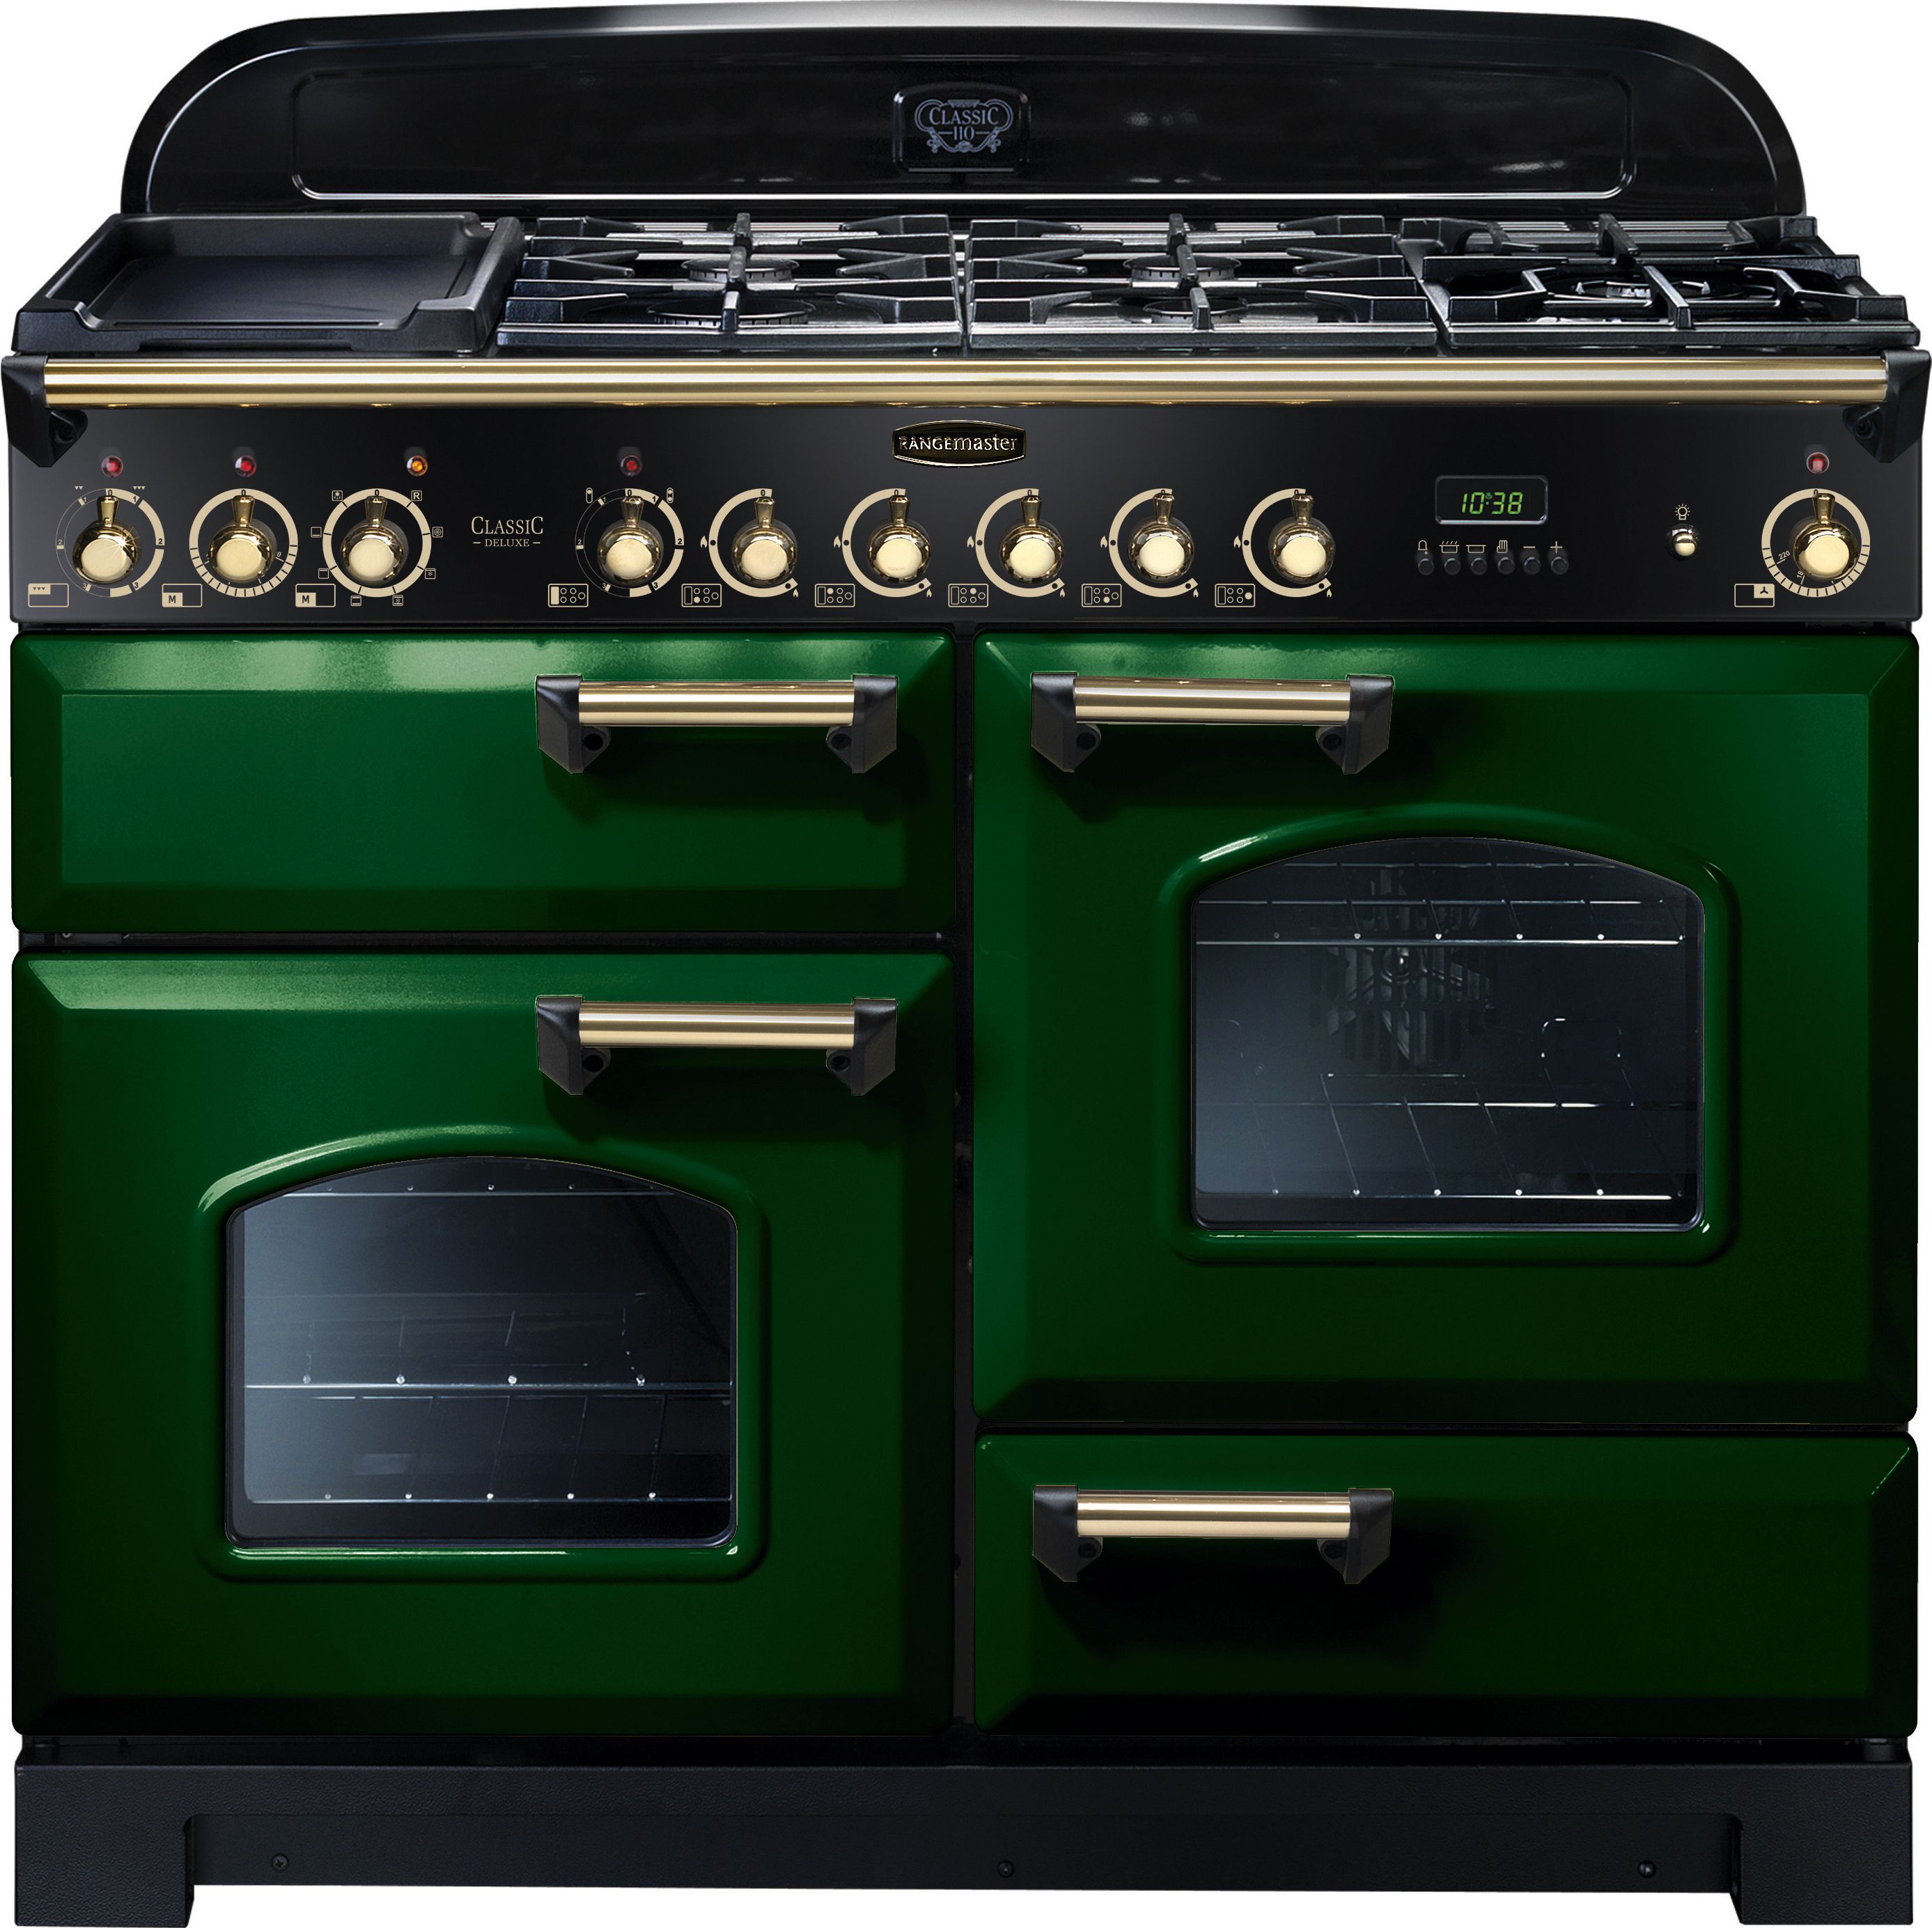 Rangemaster Classic Deluxe CDL110DFFRG/B 110cm Dual Fuel Range Cooker - Racing Green / Brass - A/A Rated, Green